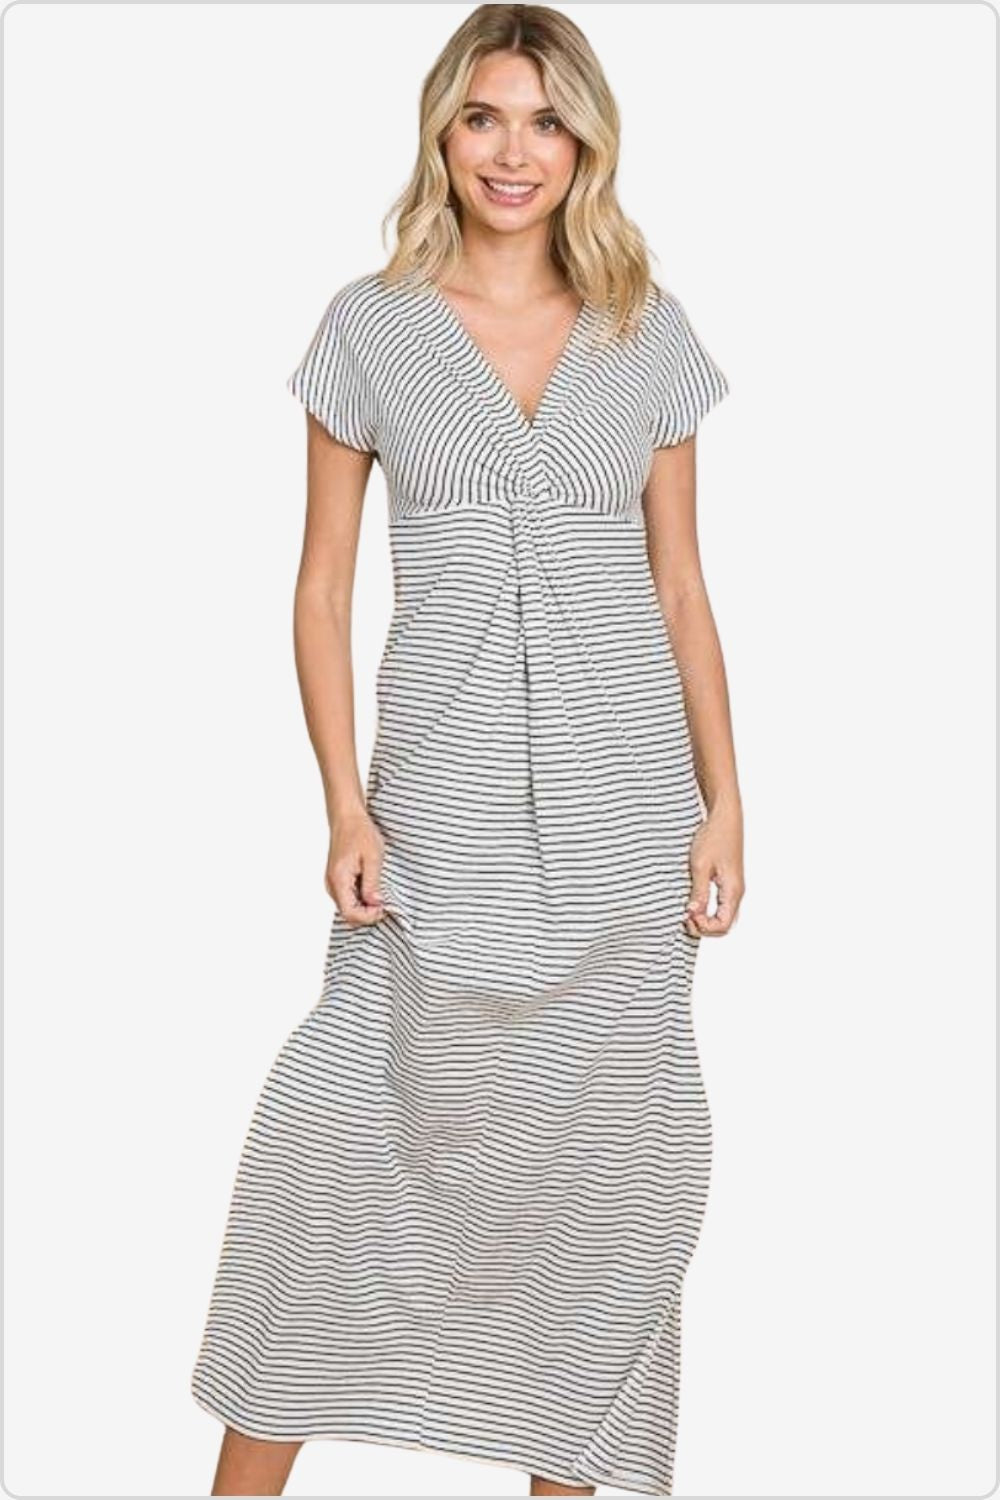 Smiling woman modeling a mid-length striped dress with twist front detail.